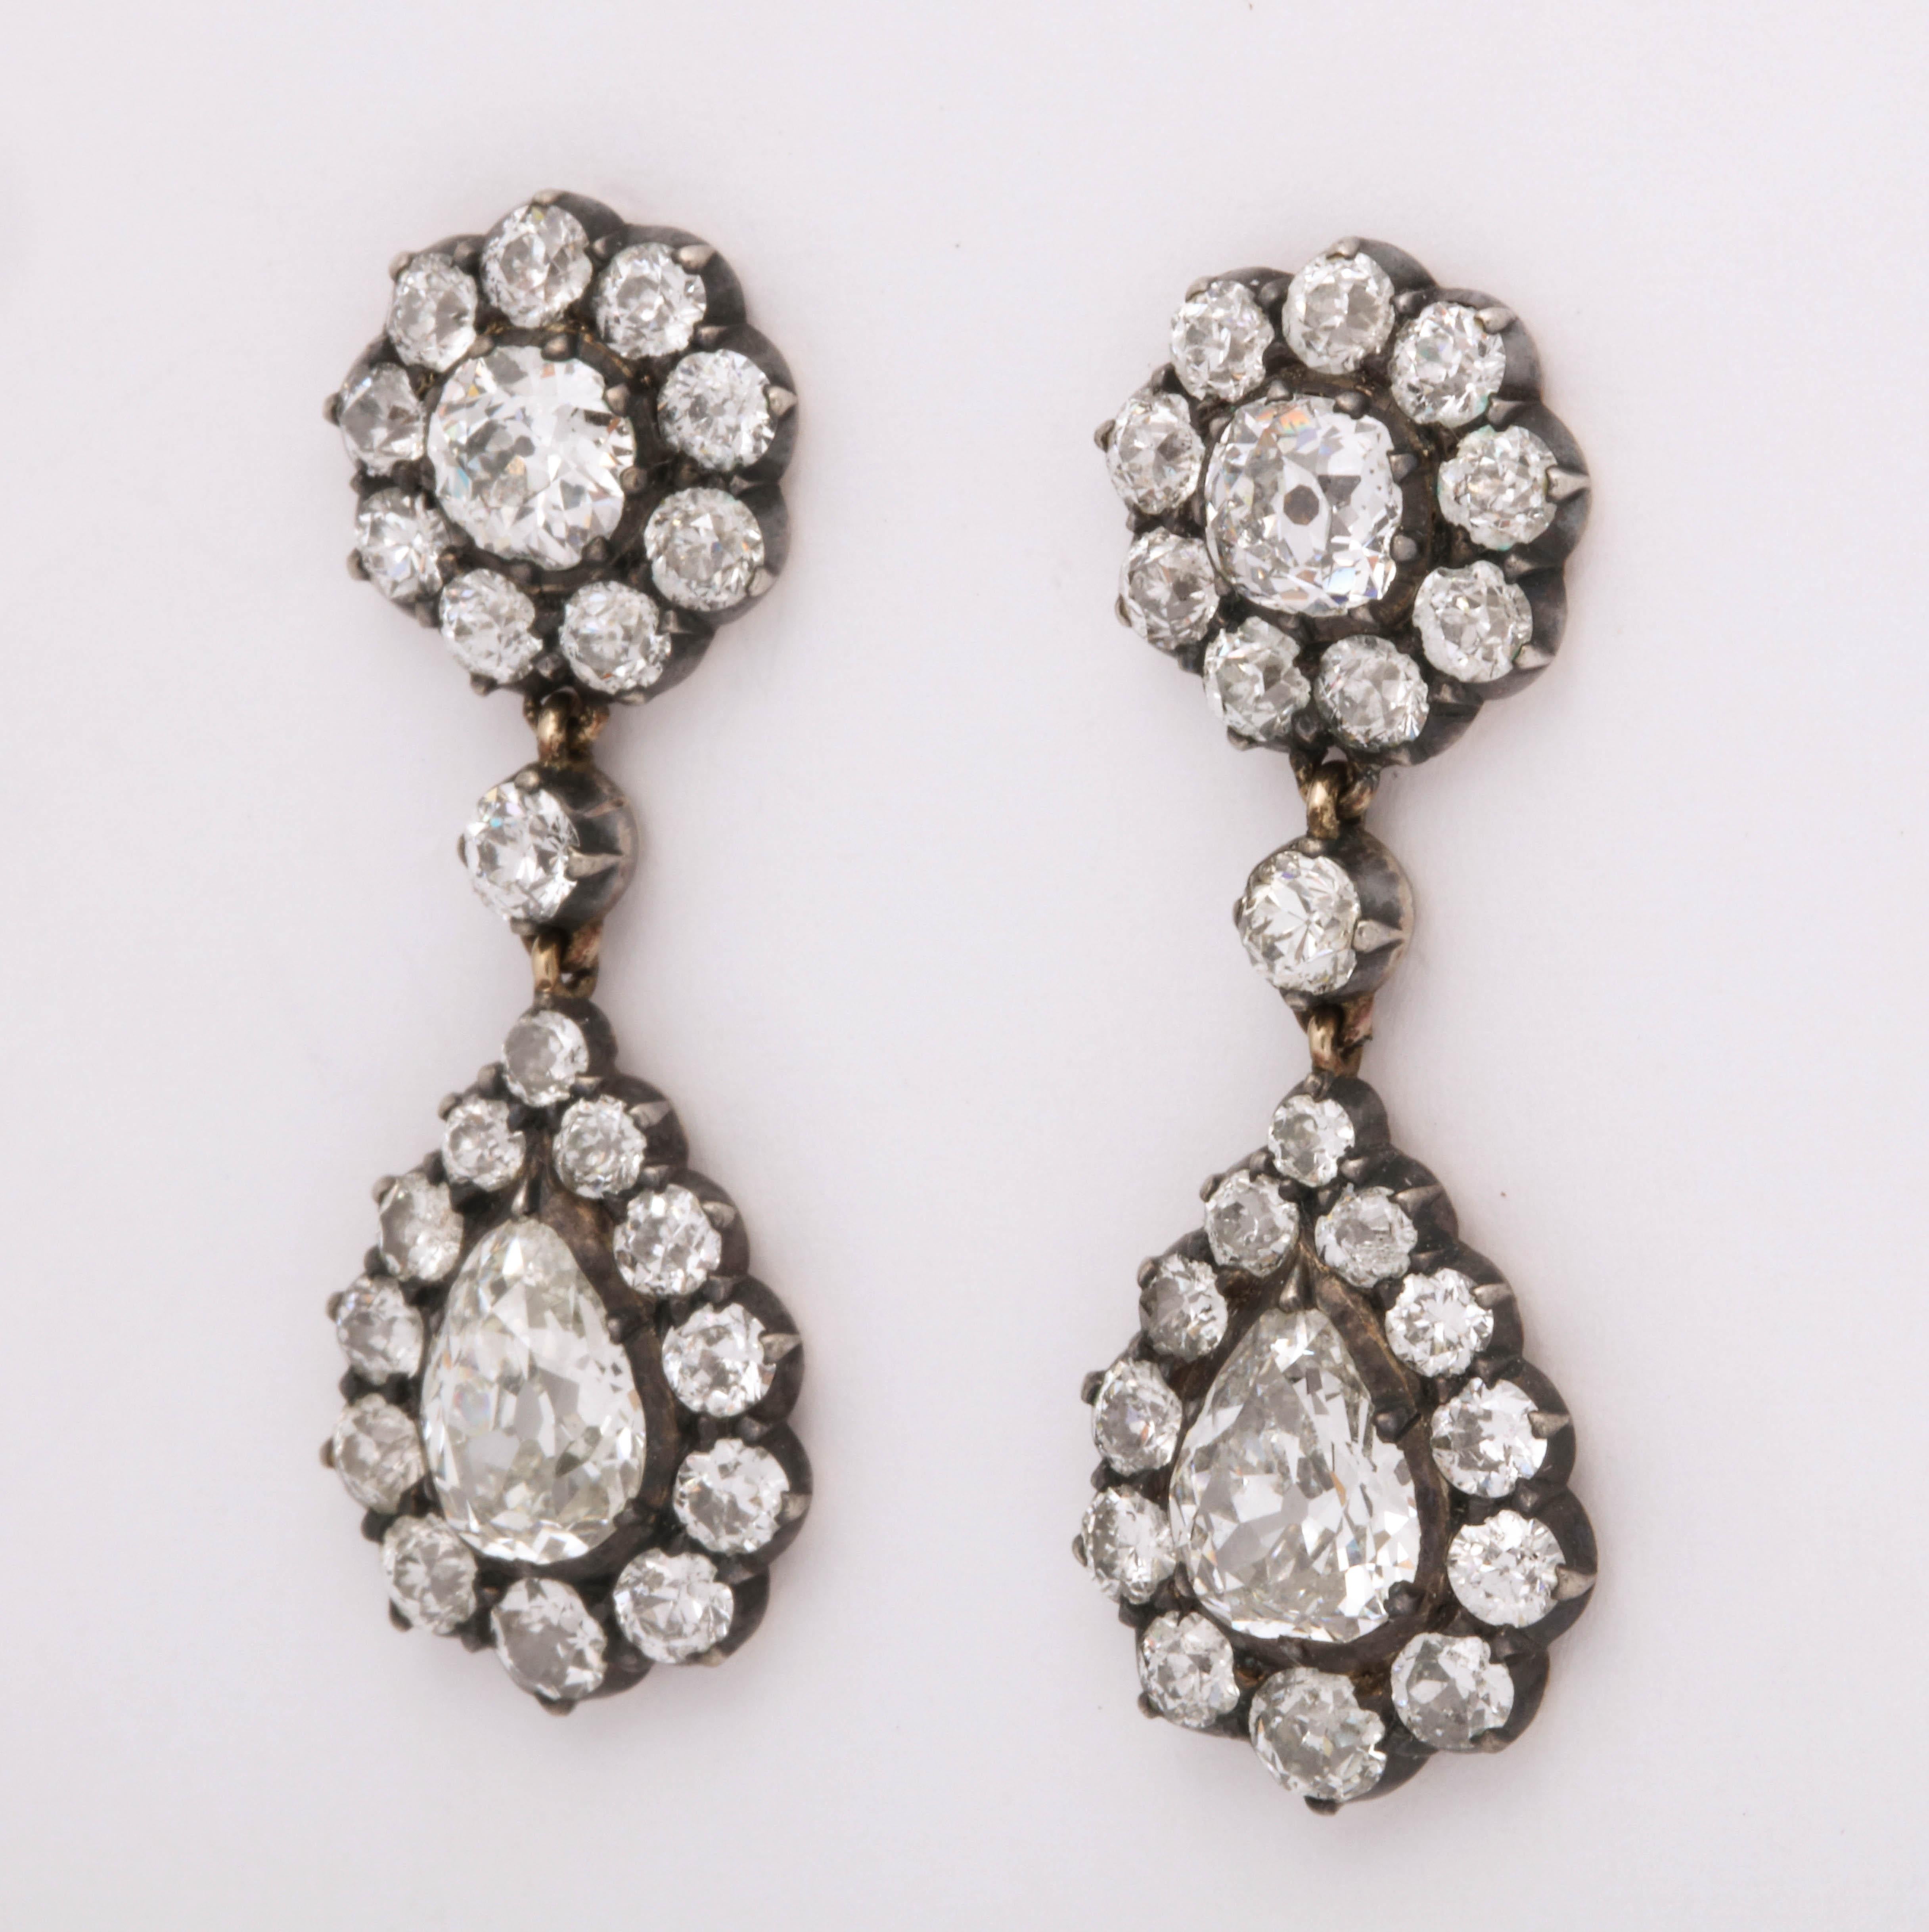 Set in silver over 15K yellow gold, these diamond earrings are set with 5.2 carats. Made in England c. 1890 and in beautiful condition. The old cut stones really sparkle! 